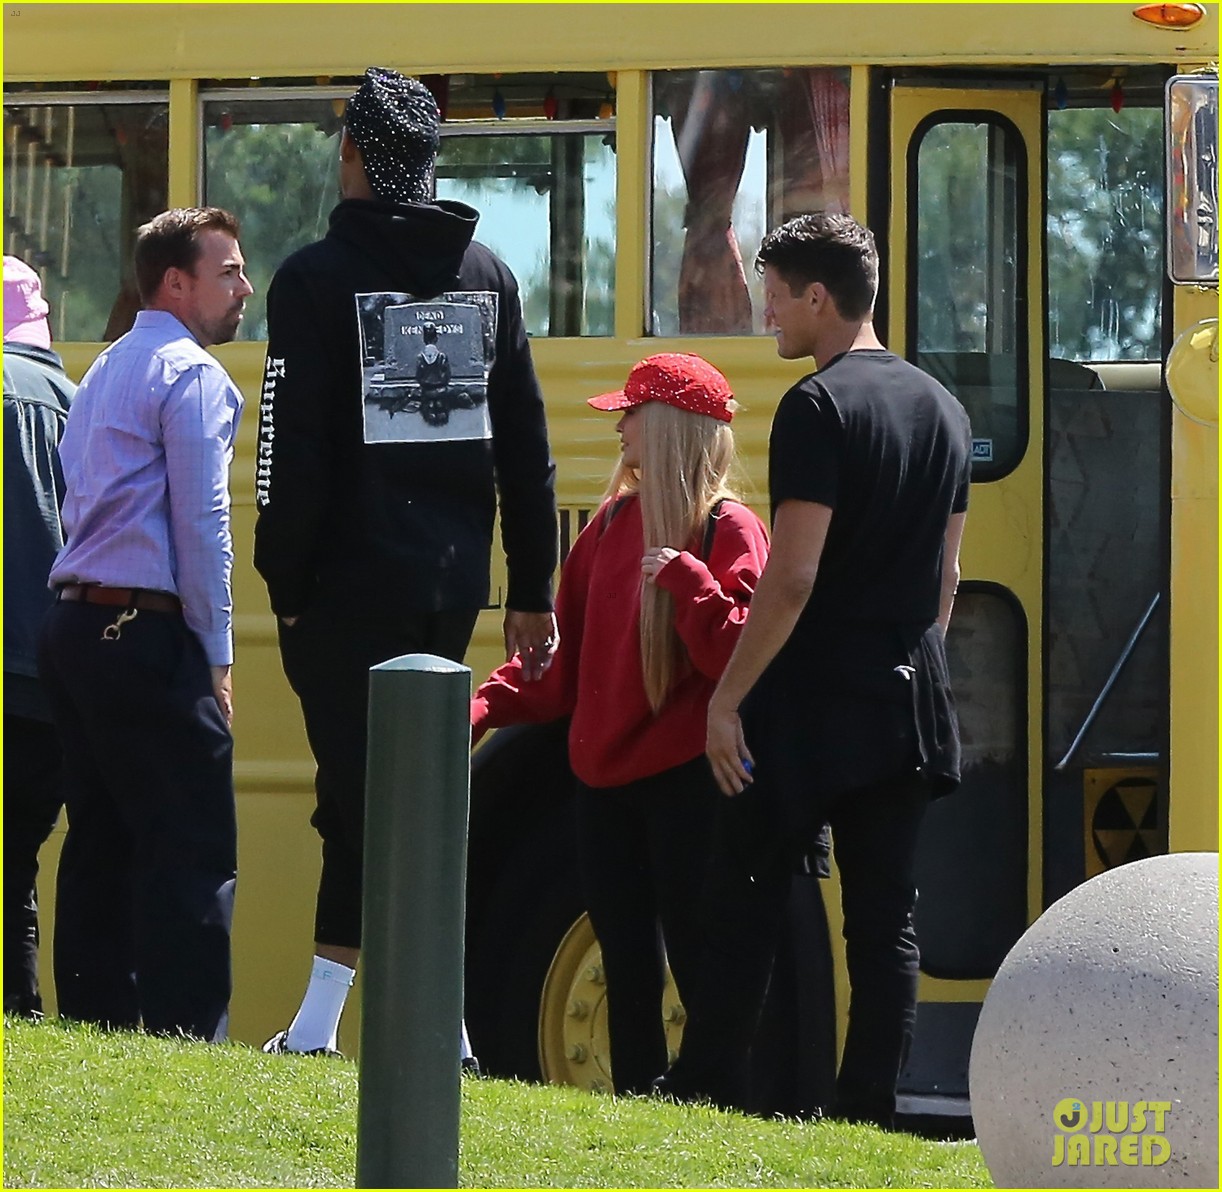 kendall kylie jenner spend the day at legoland 29